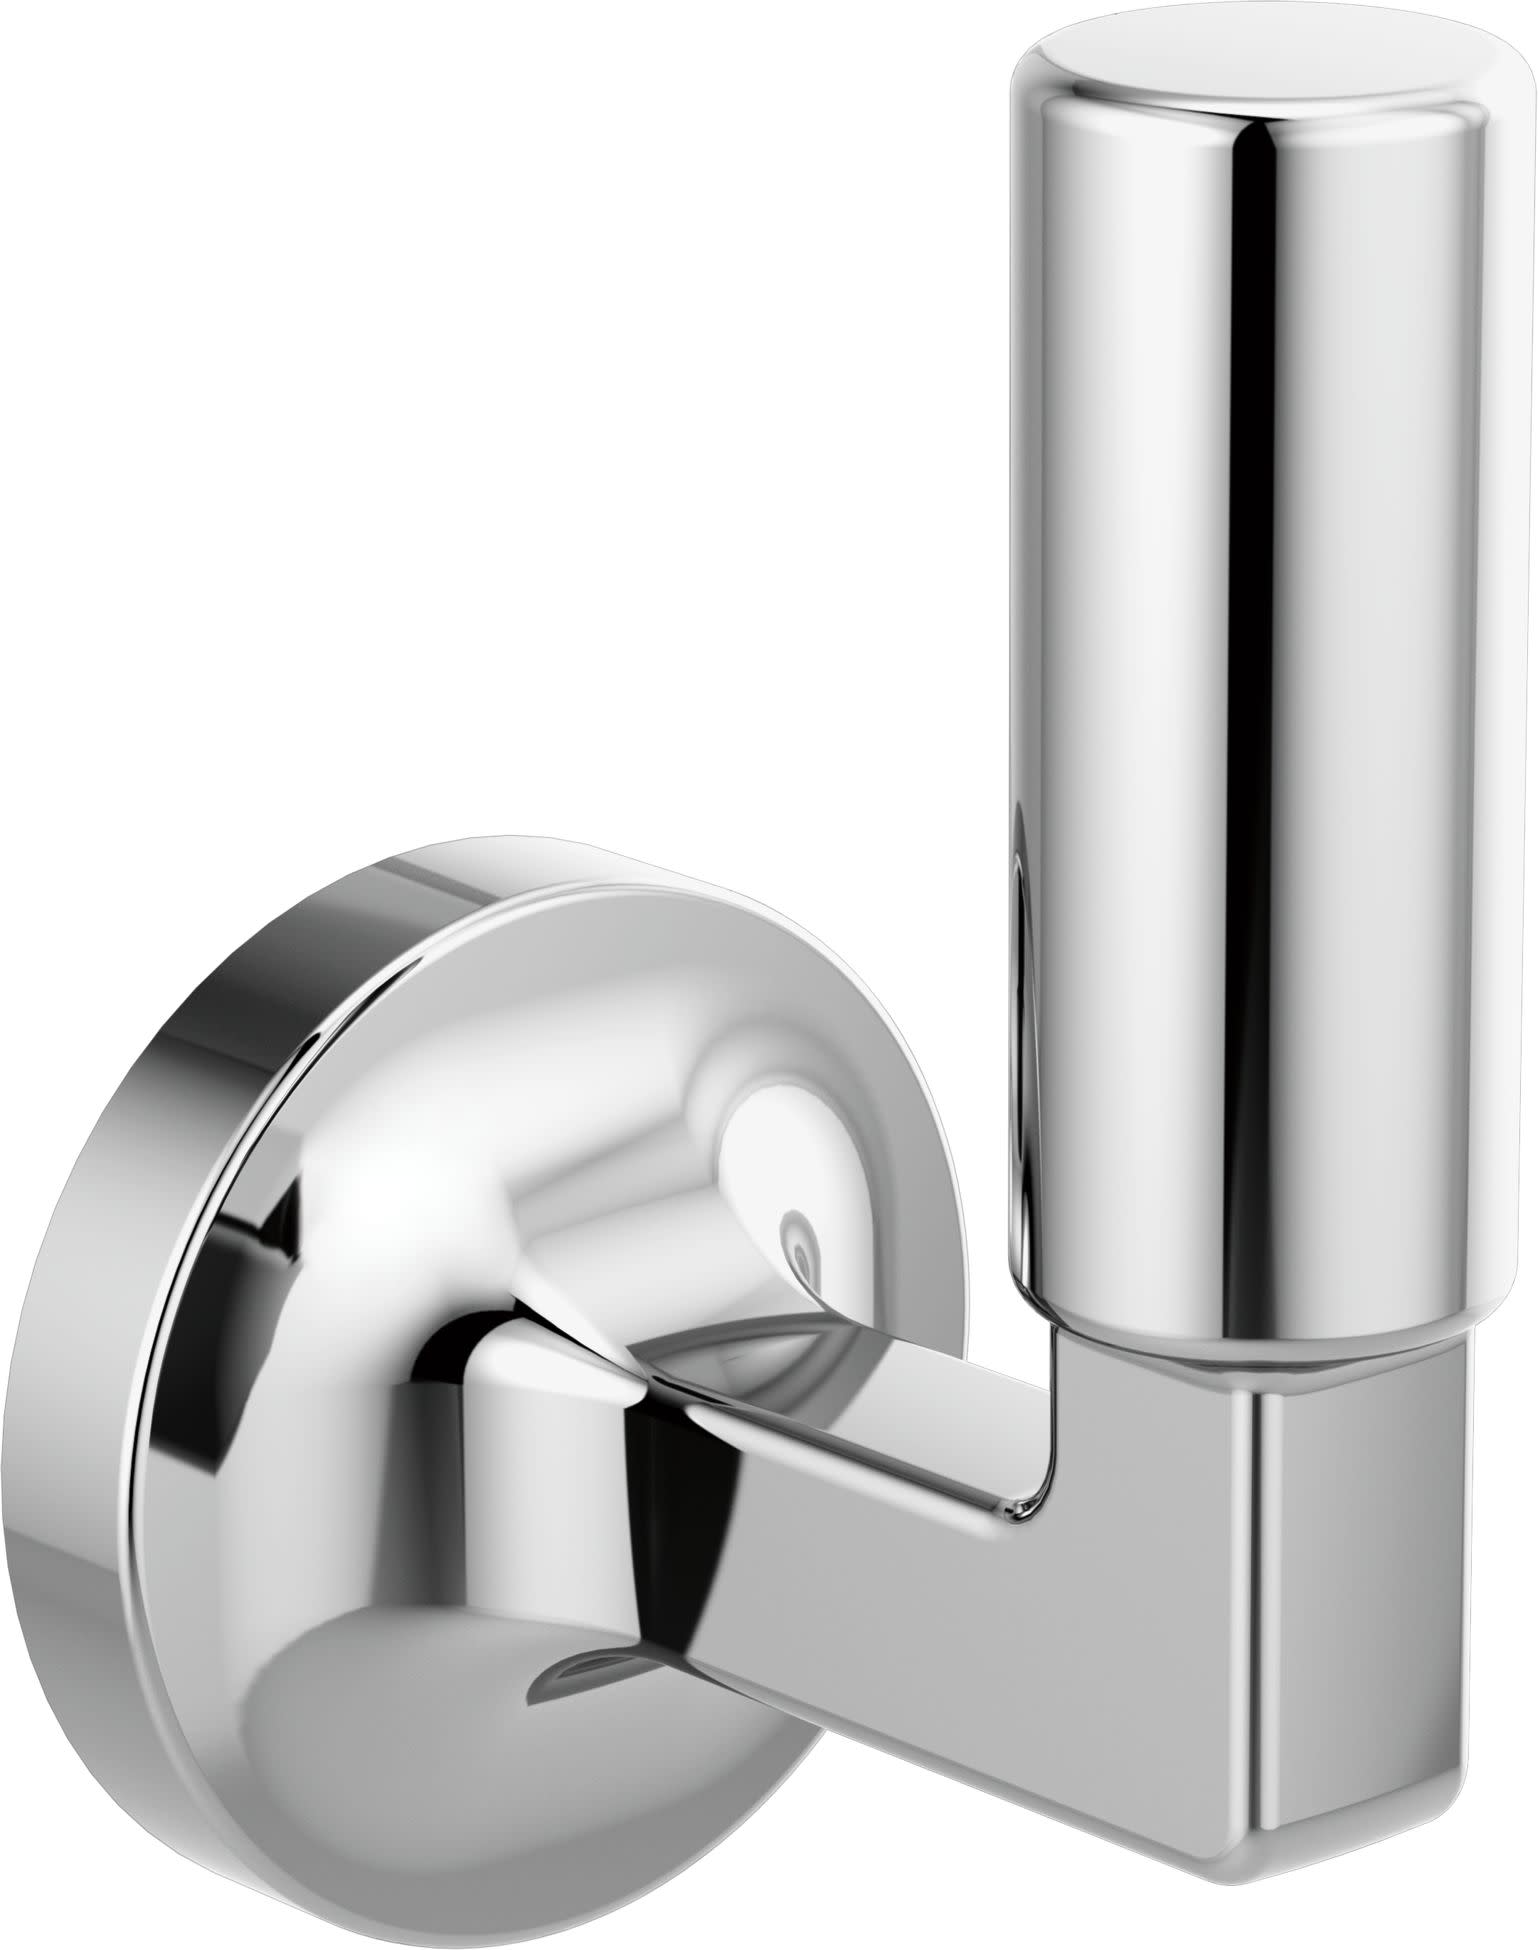 Delta 74835 Bowery Single Robe Hook - Chrome for sale online